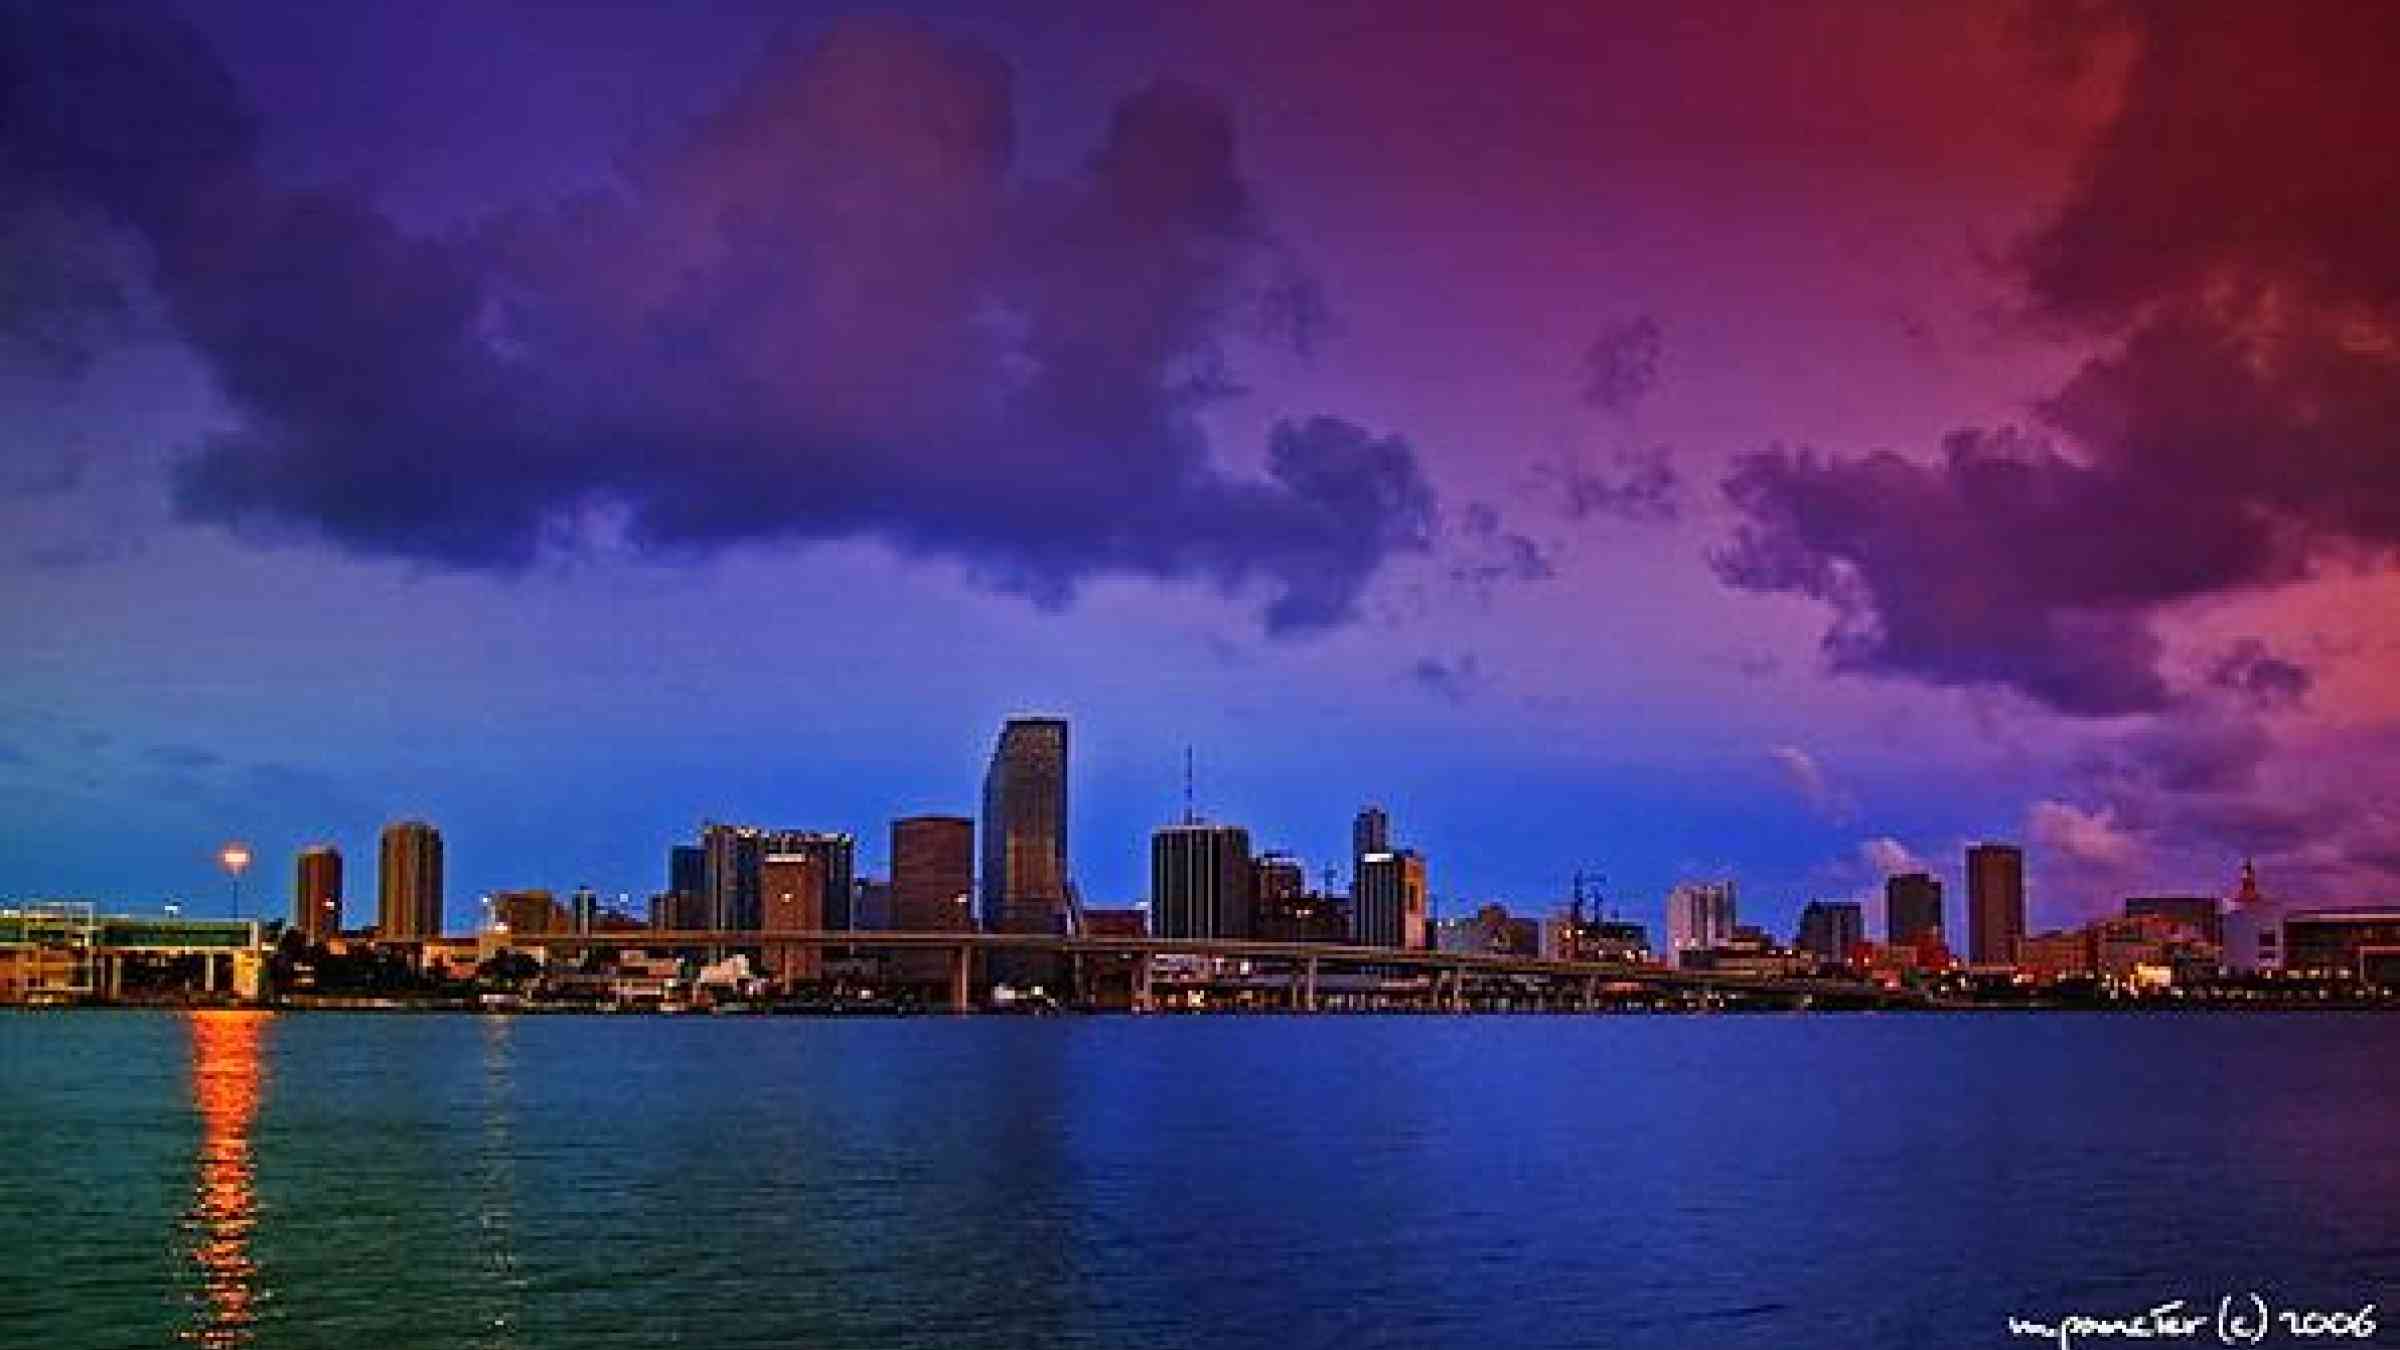 Miami skyline dusk photo by Michael Pancier Photography, flickr CC BY-NC-ND 2.0, https://www.flickr.com/photos/pancier/262028998/